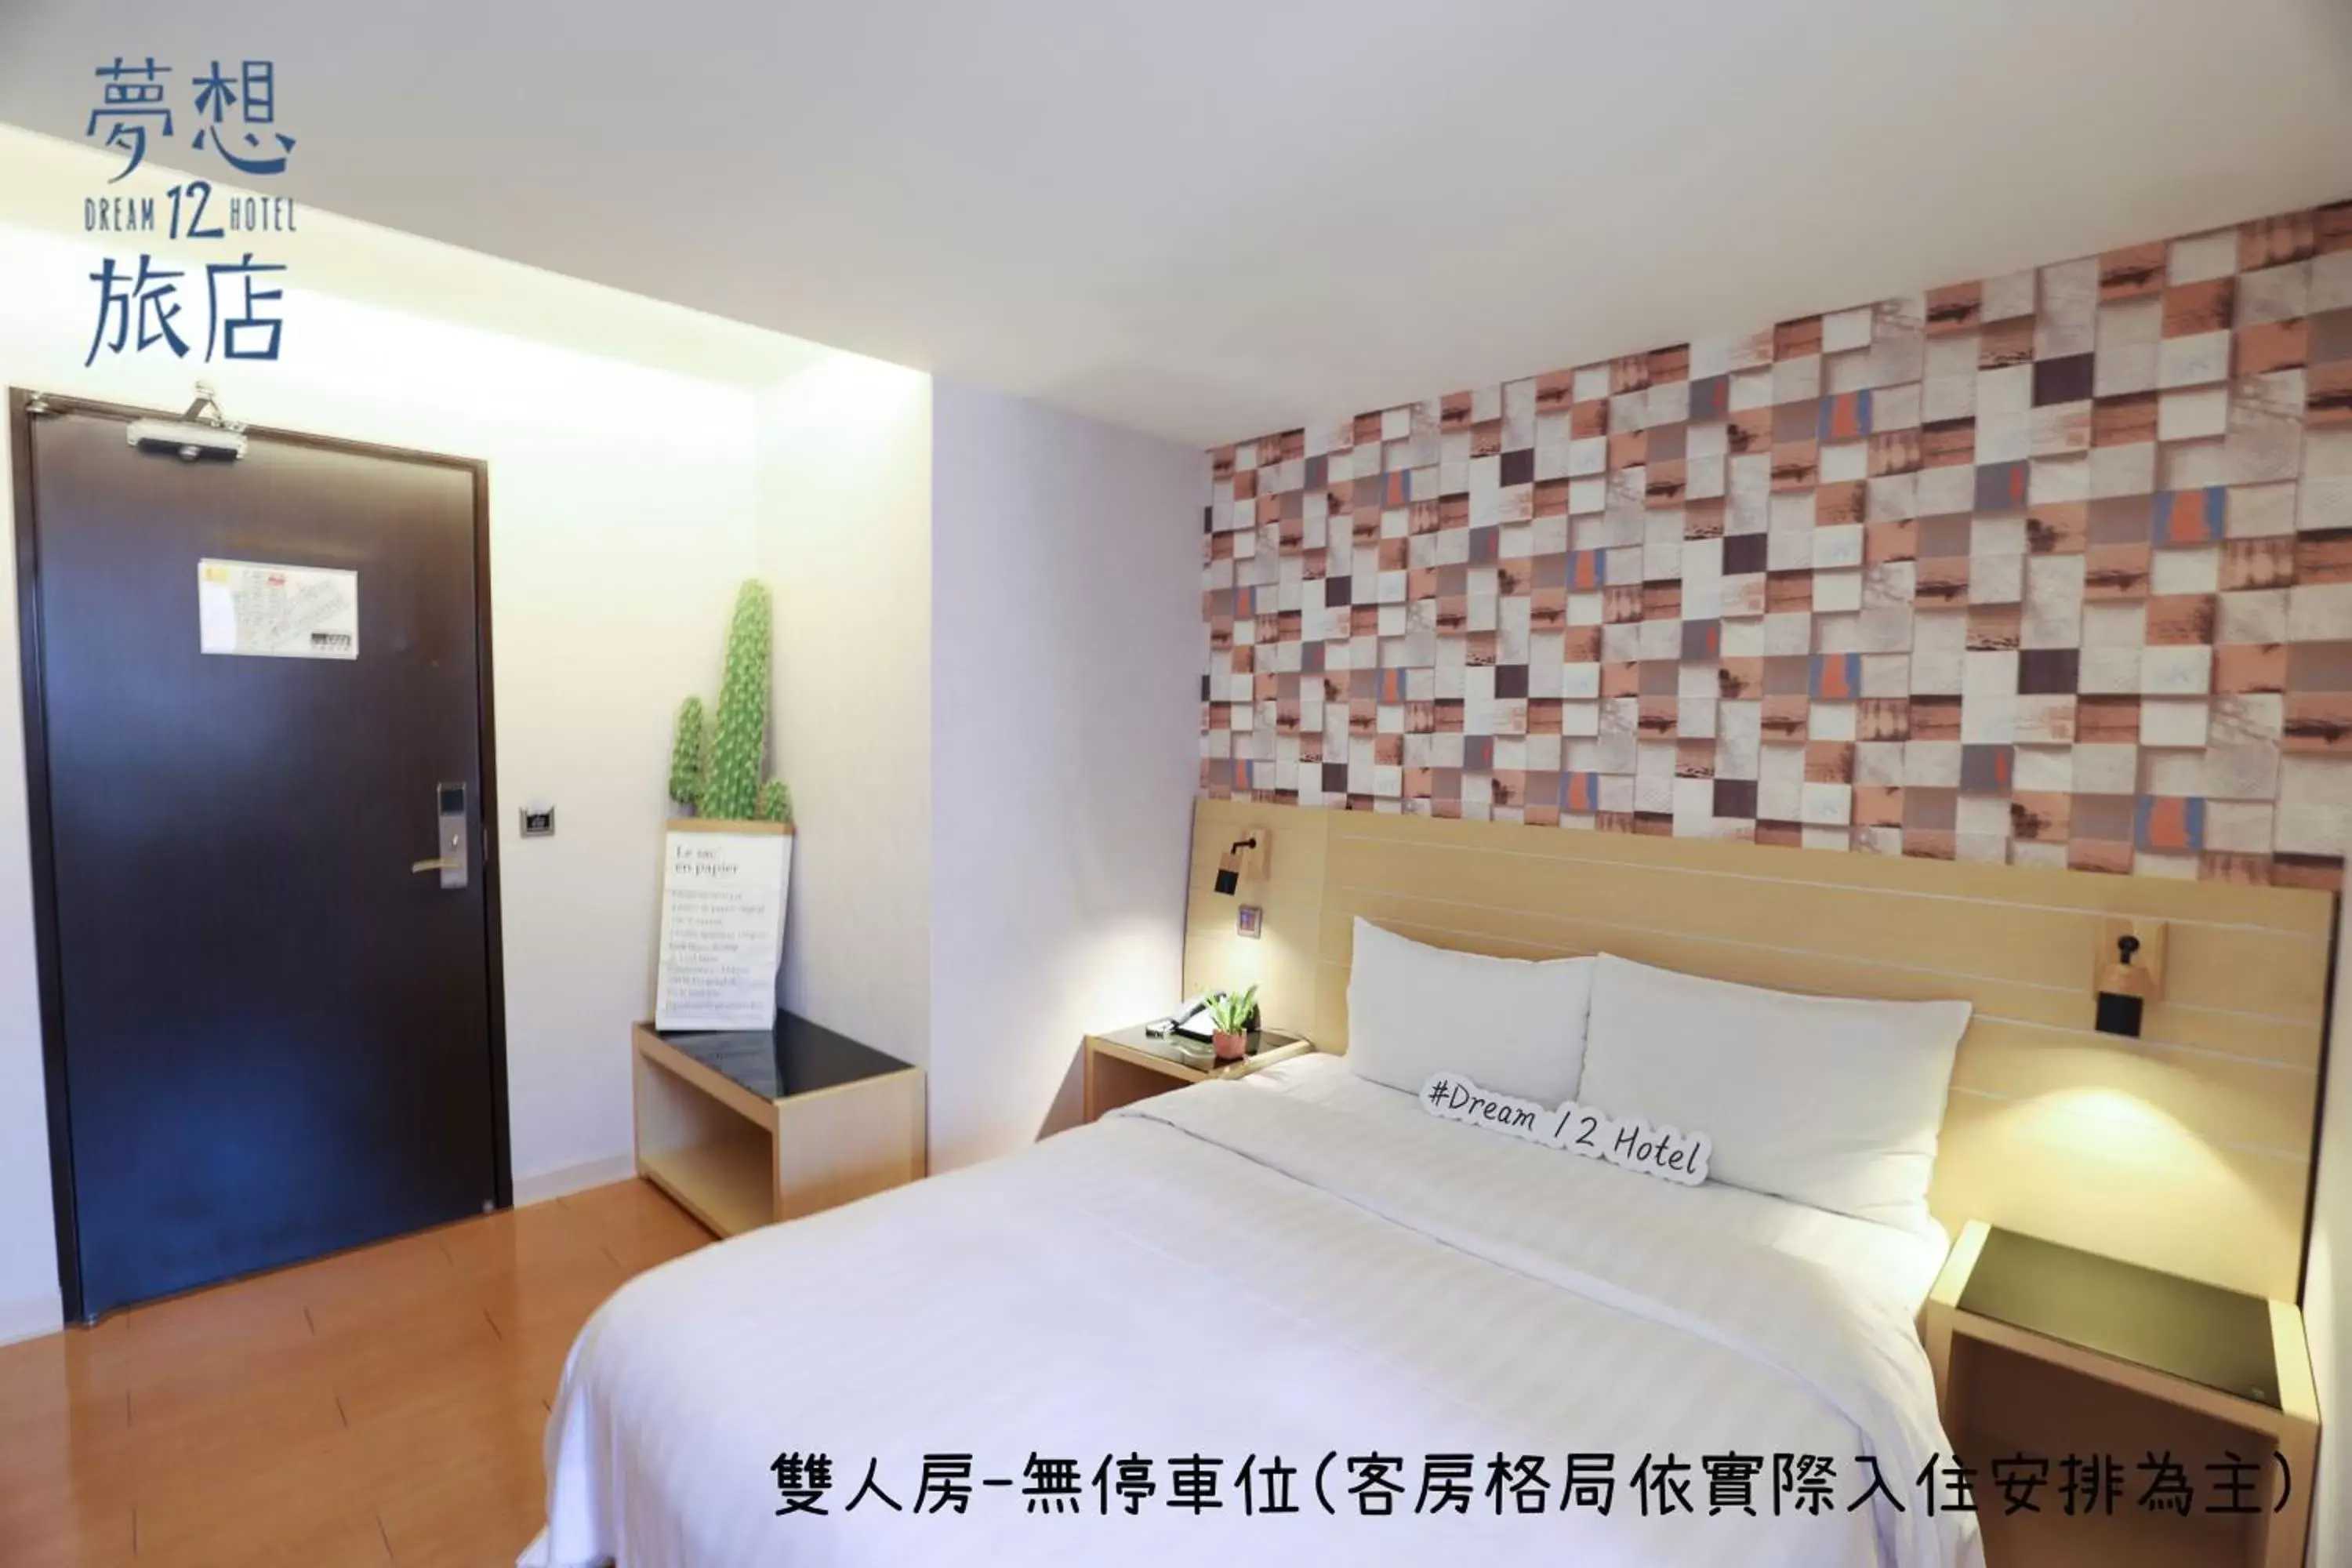 Standard Double Room with Balcony in Dream 12 Hotel